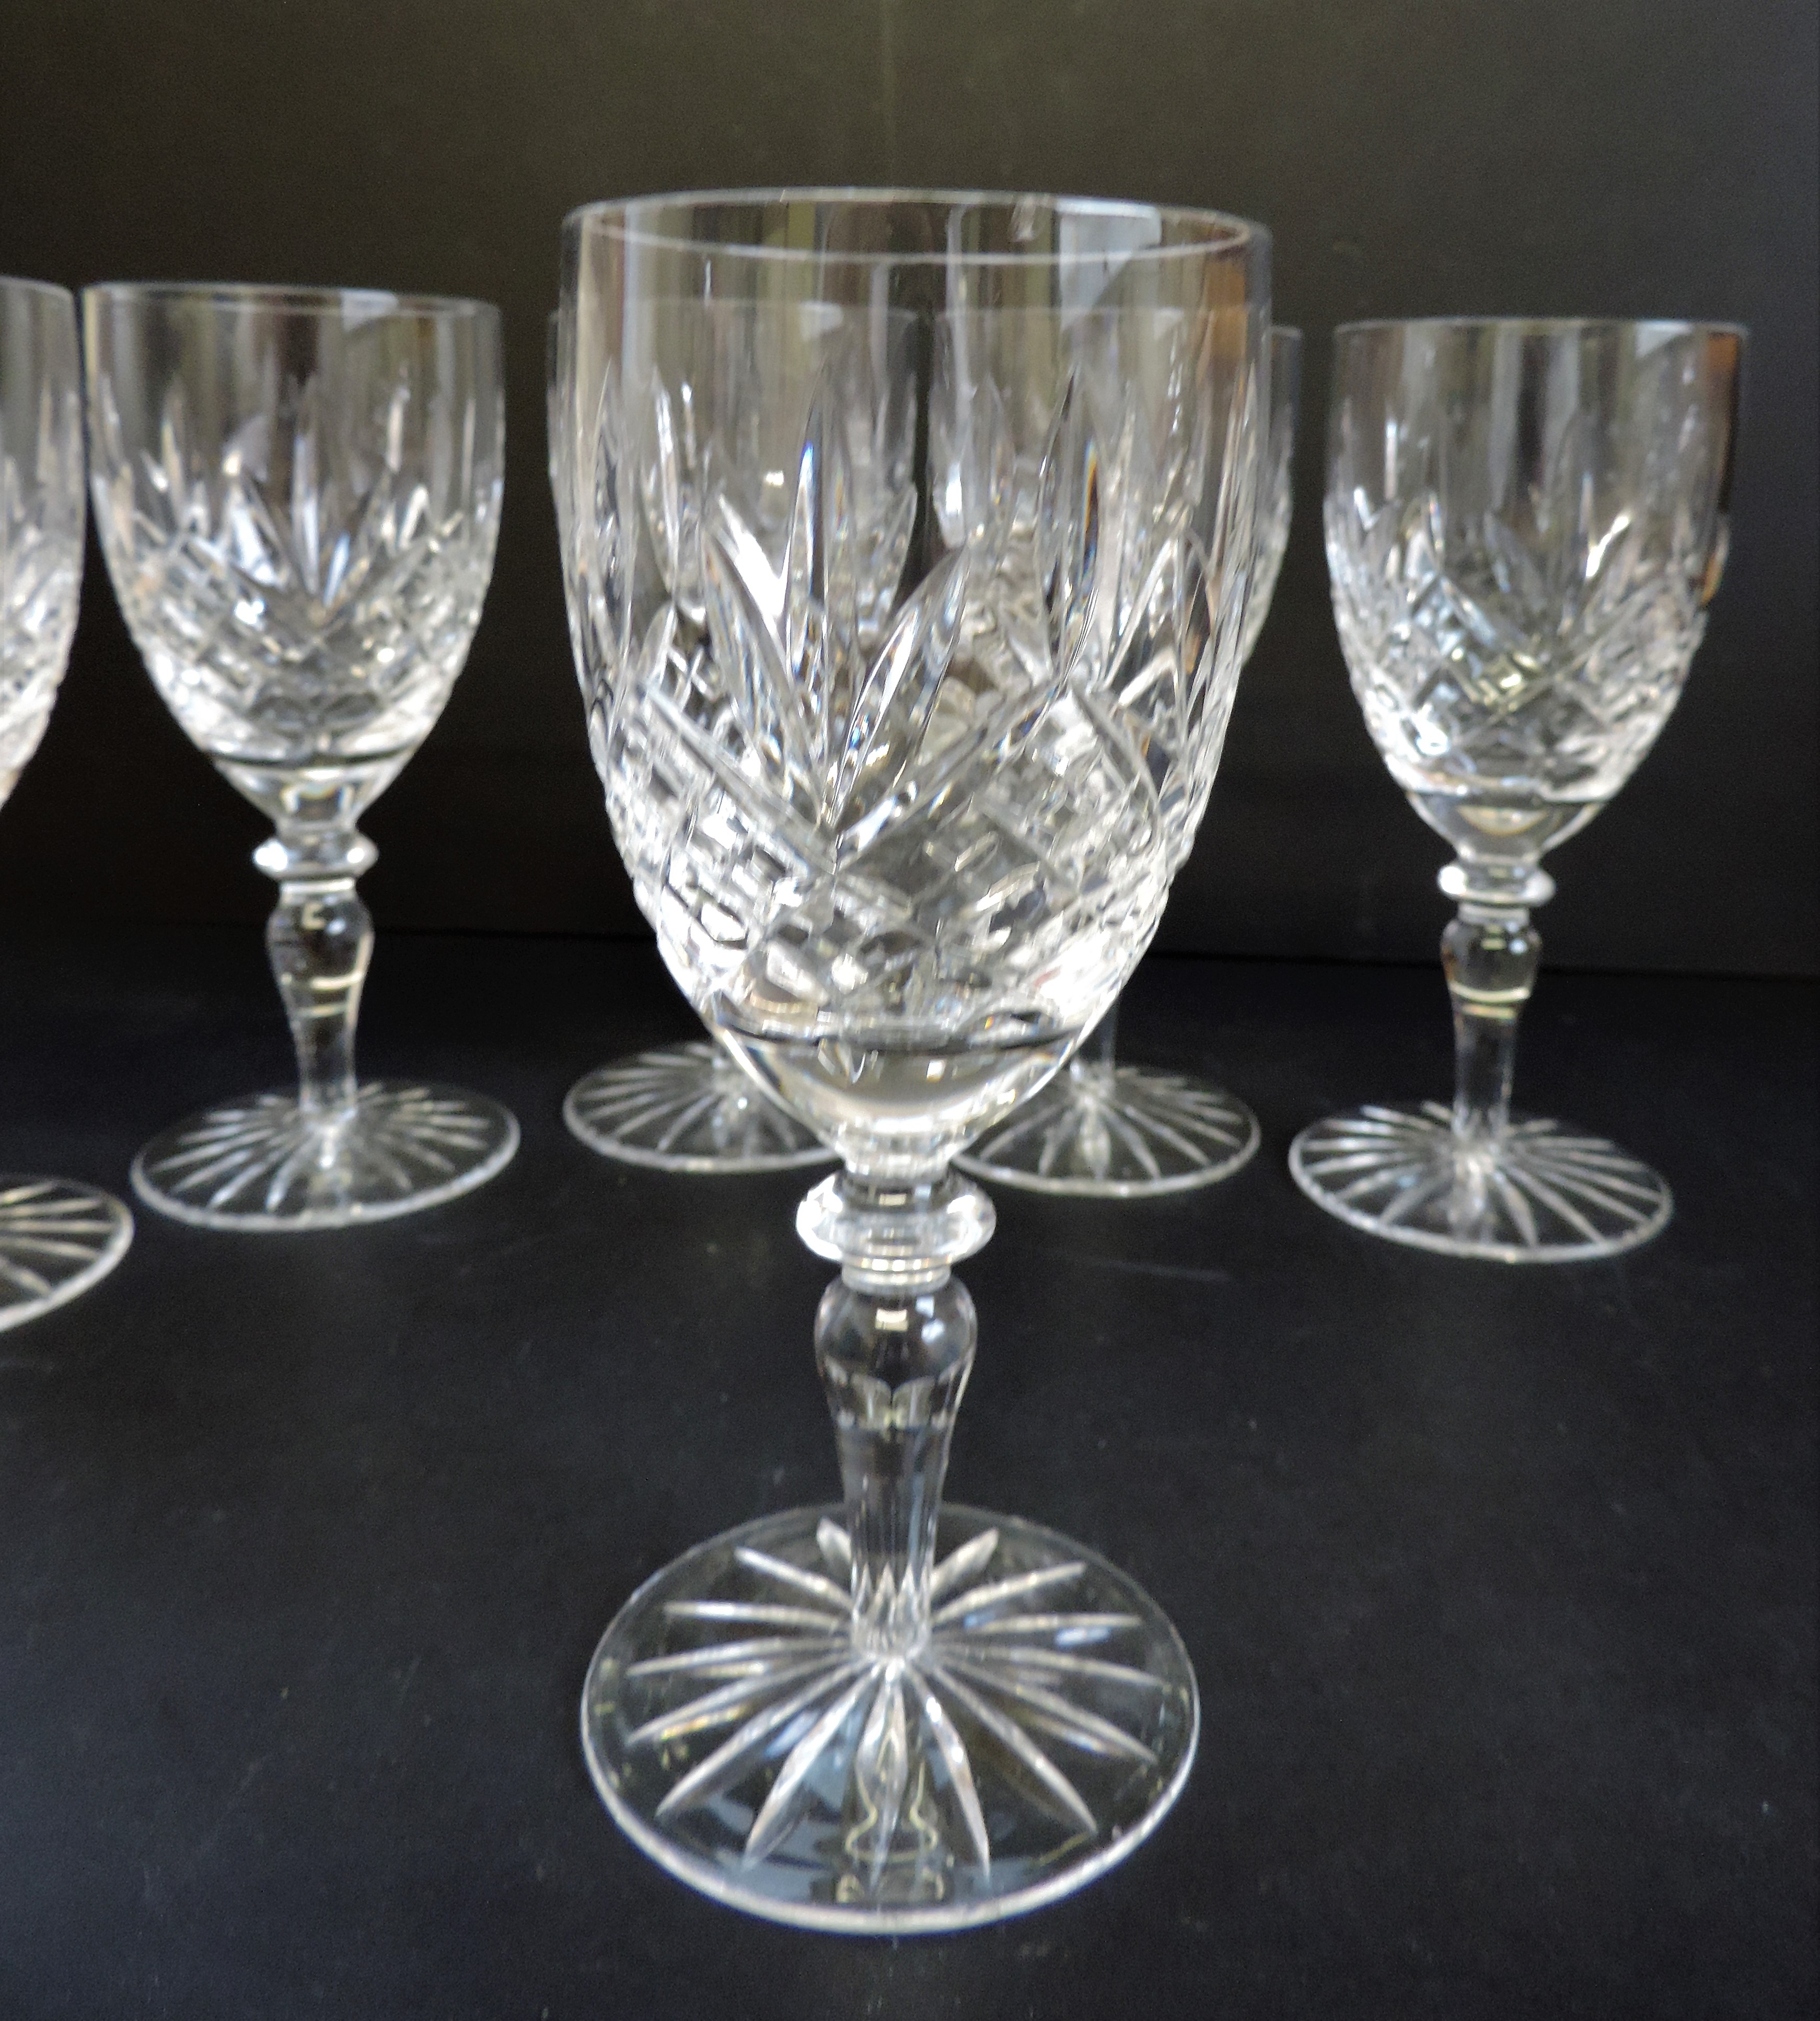 Set 6 Cut Crystal Wine Glasses & Silver Plated Bottle Coaster - Image 6 of 6